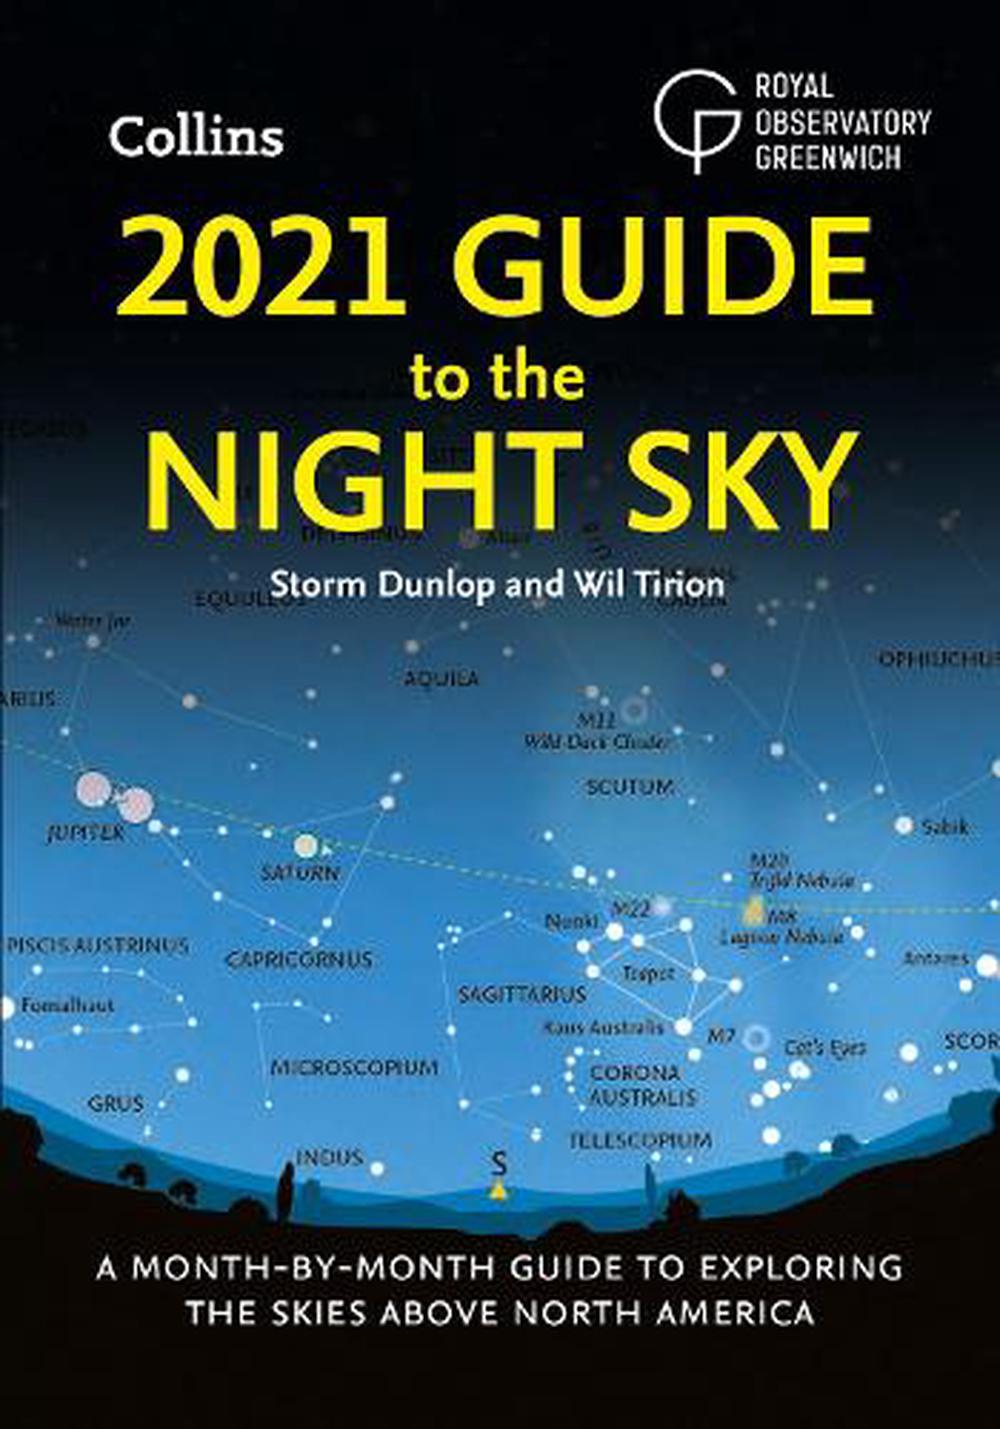 2021 Guide to the Night Sky by Storm Dunlop, Paperback, 9780008399771